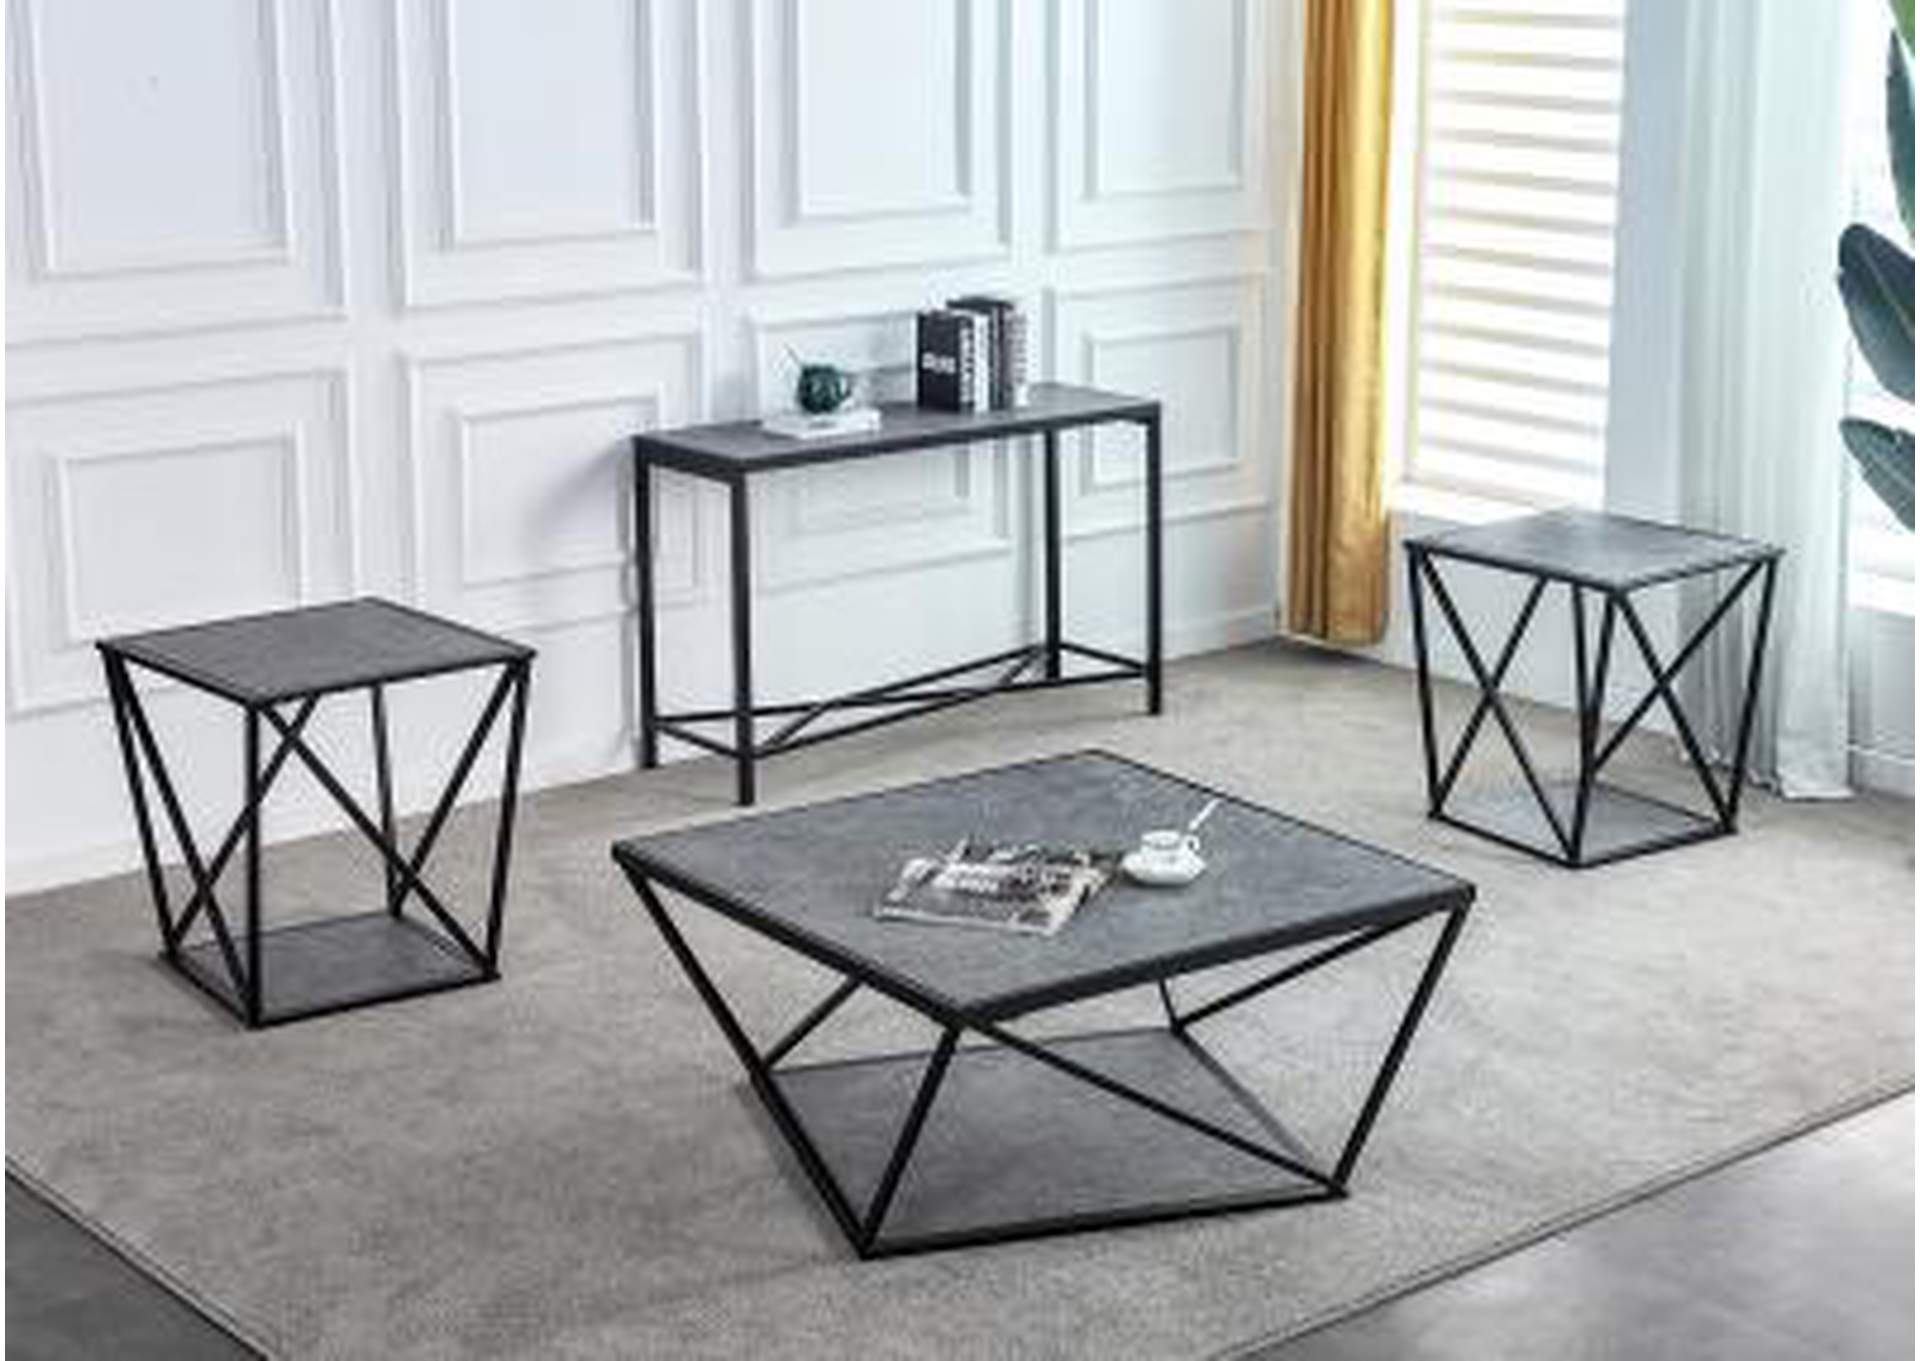 T125 End Table,Nationwide